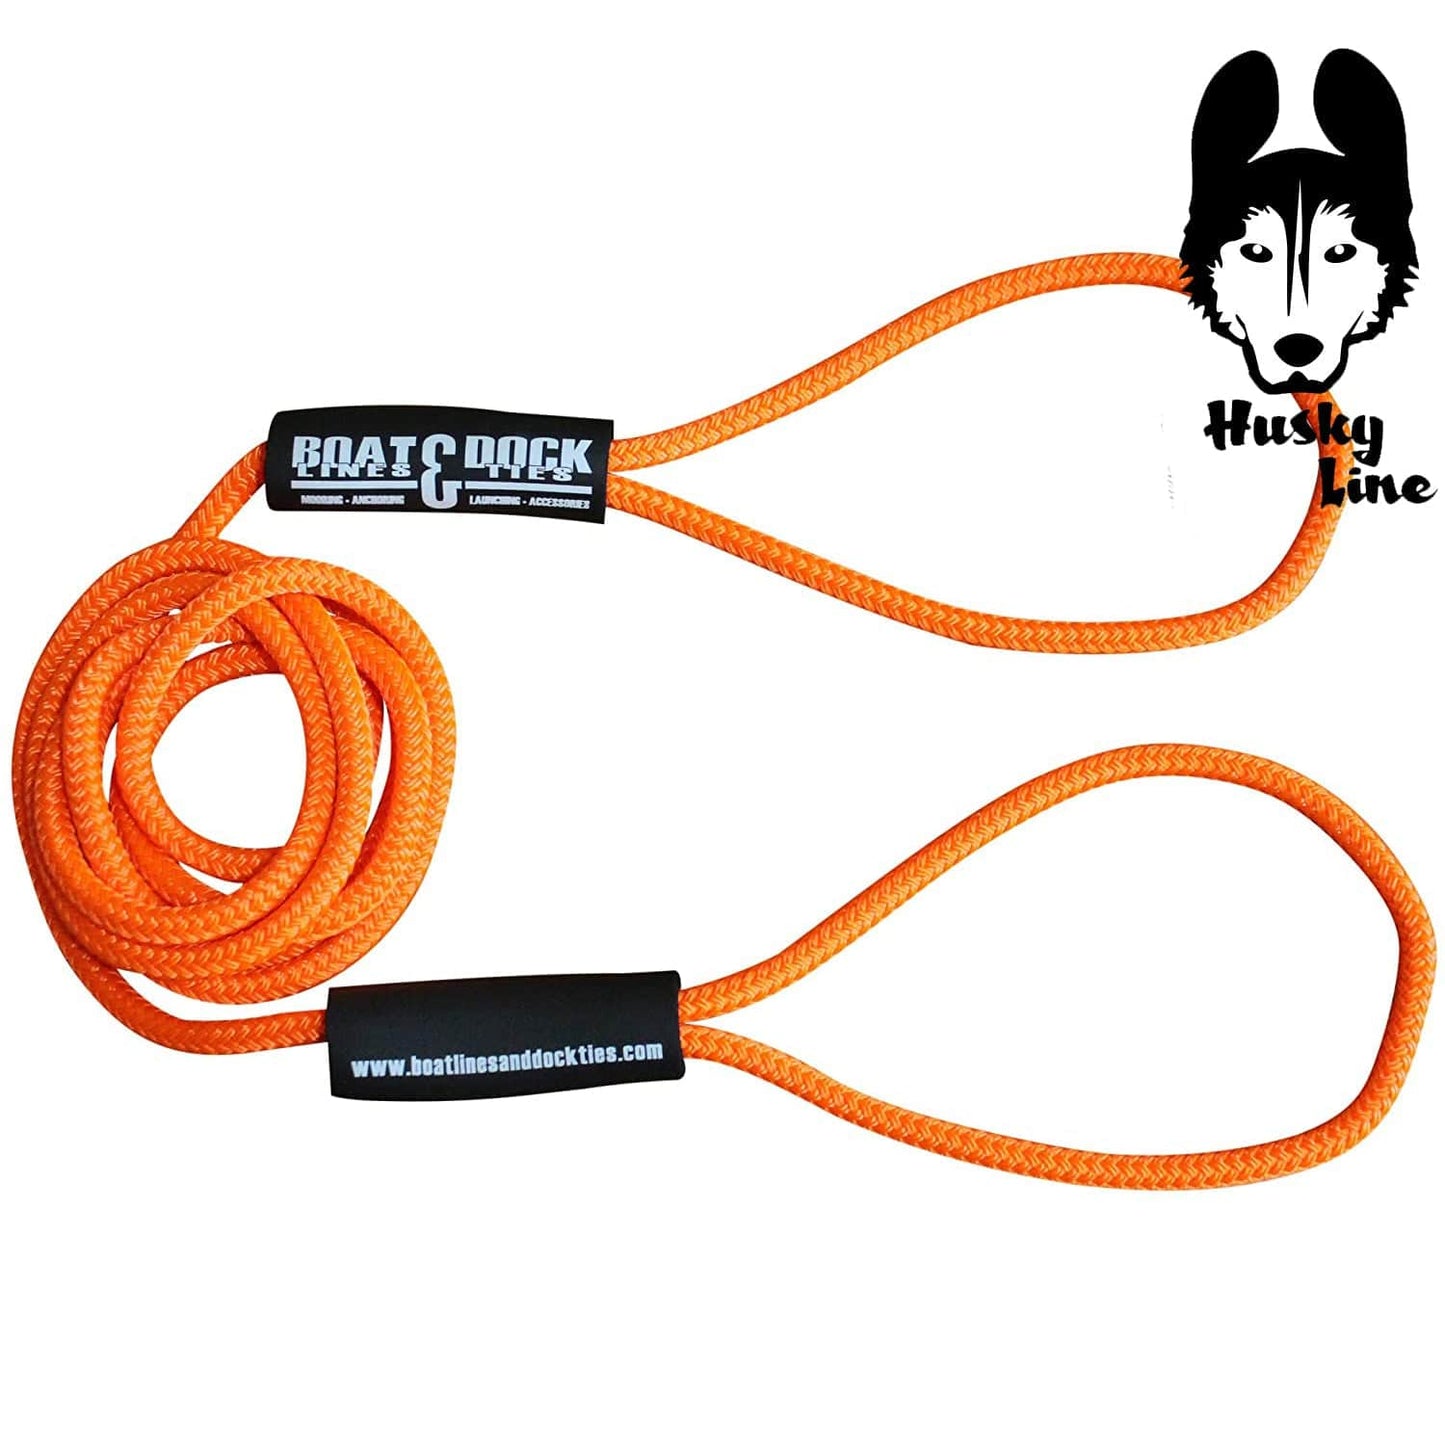 Boat Throw Rope- "Husky Line" 2 Loop Double Braided Nylon Rope, Stitched Loops and Floats - Boat Lines & Dock Ties Boat Lines & Dock Ties 25' / Orange